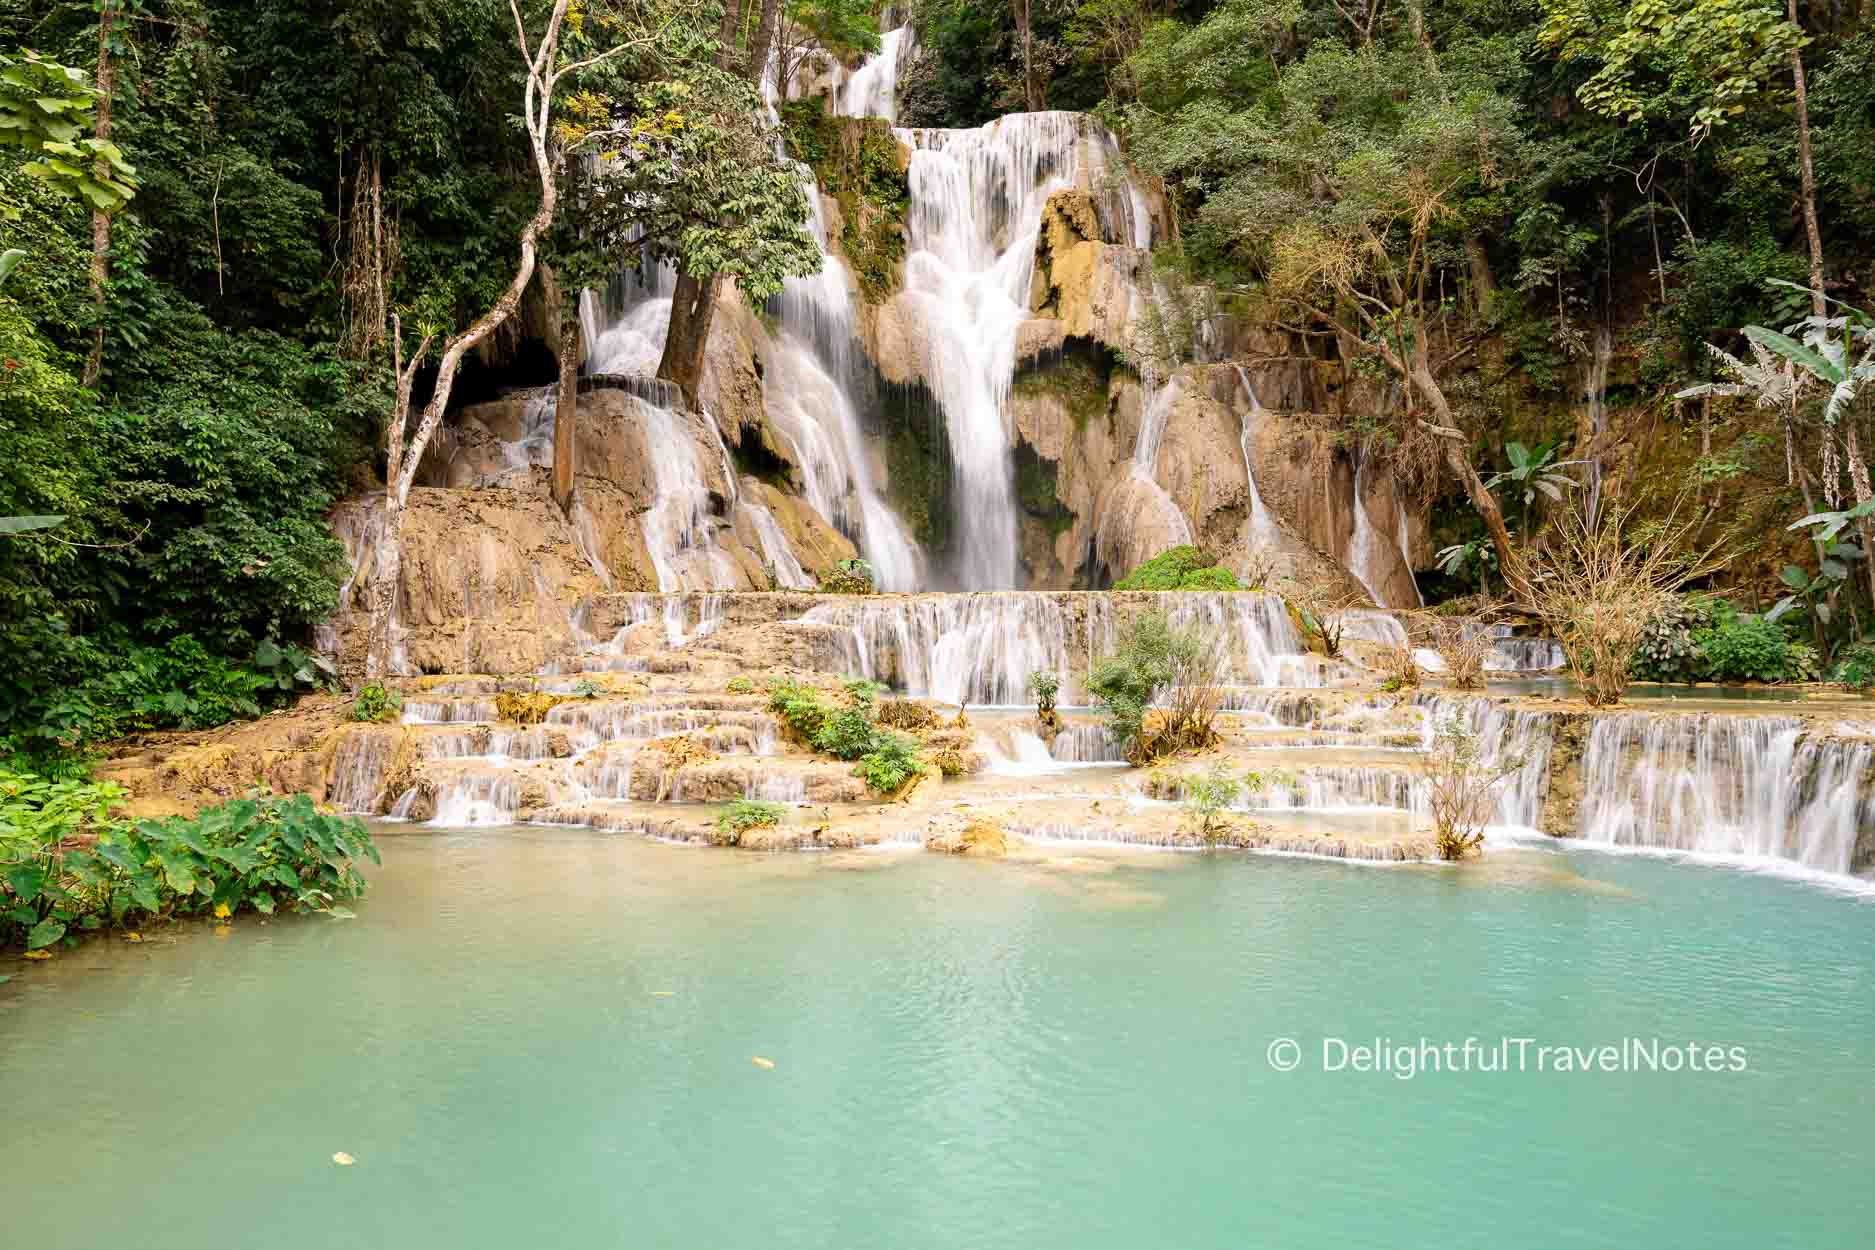 the main Kuang Si waterfall with its cascading water and milky blue pool, a must-see when visiting Luang Prabang.